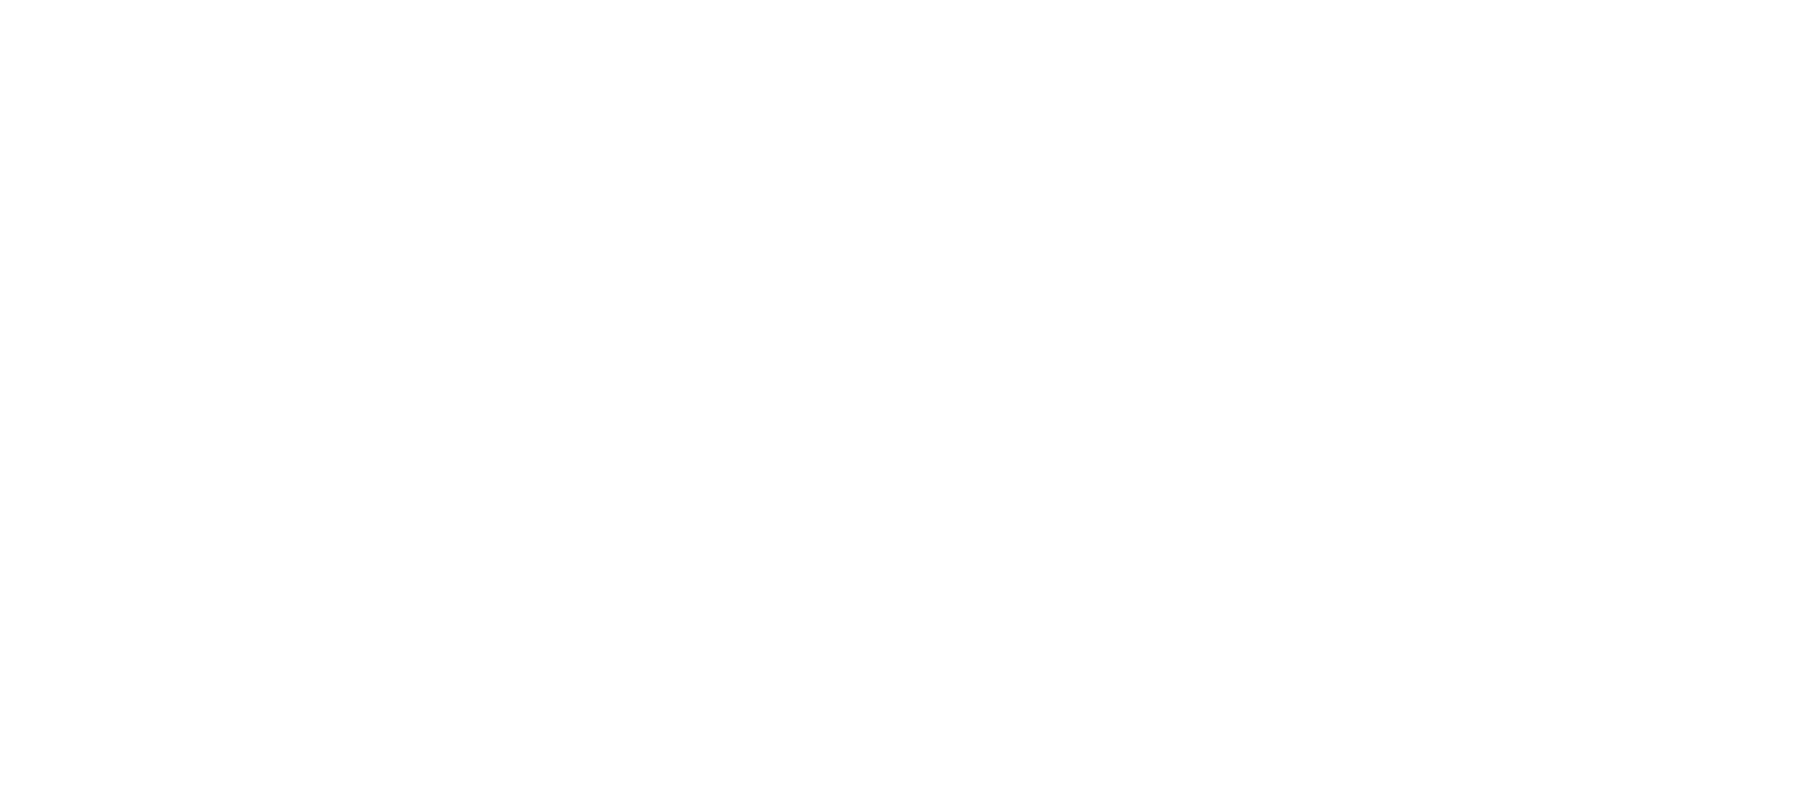 Your Business Expo